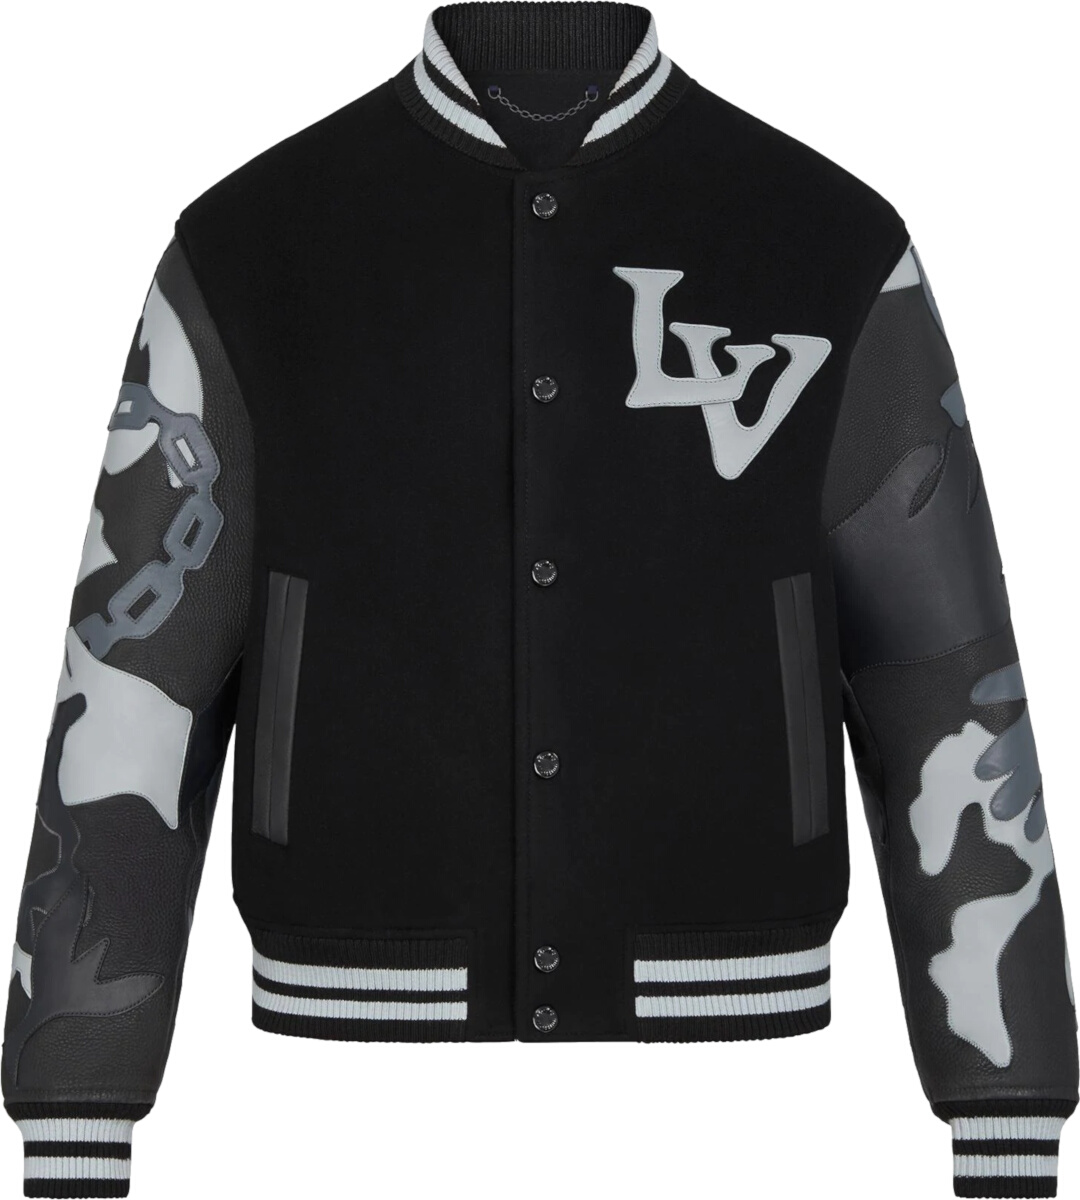 Louis Vuitton Black & Chains-Camo Varsity Jacket | Incorporated Style